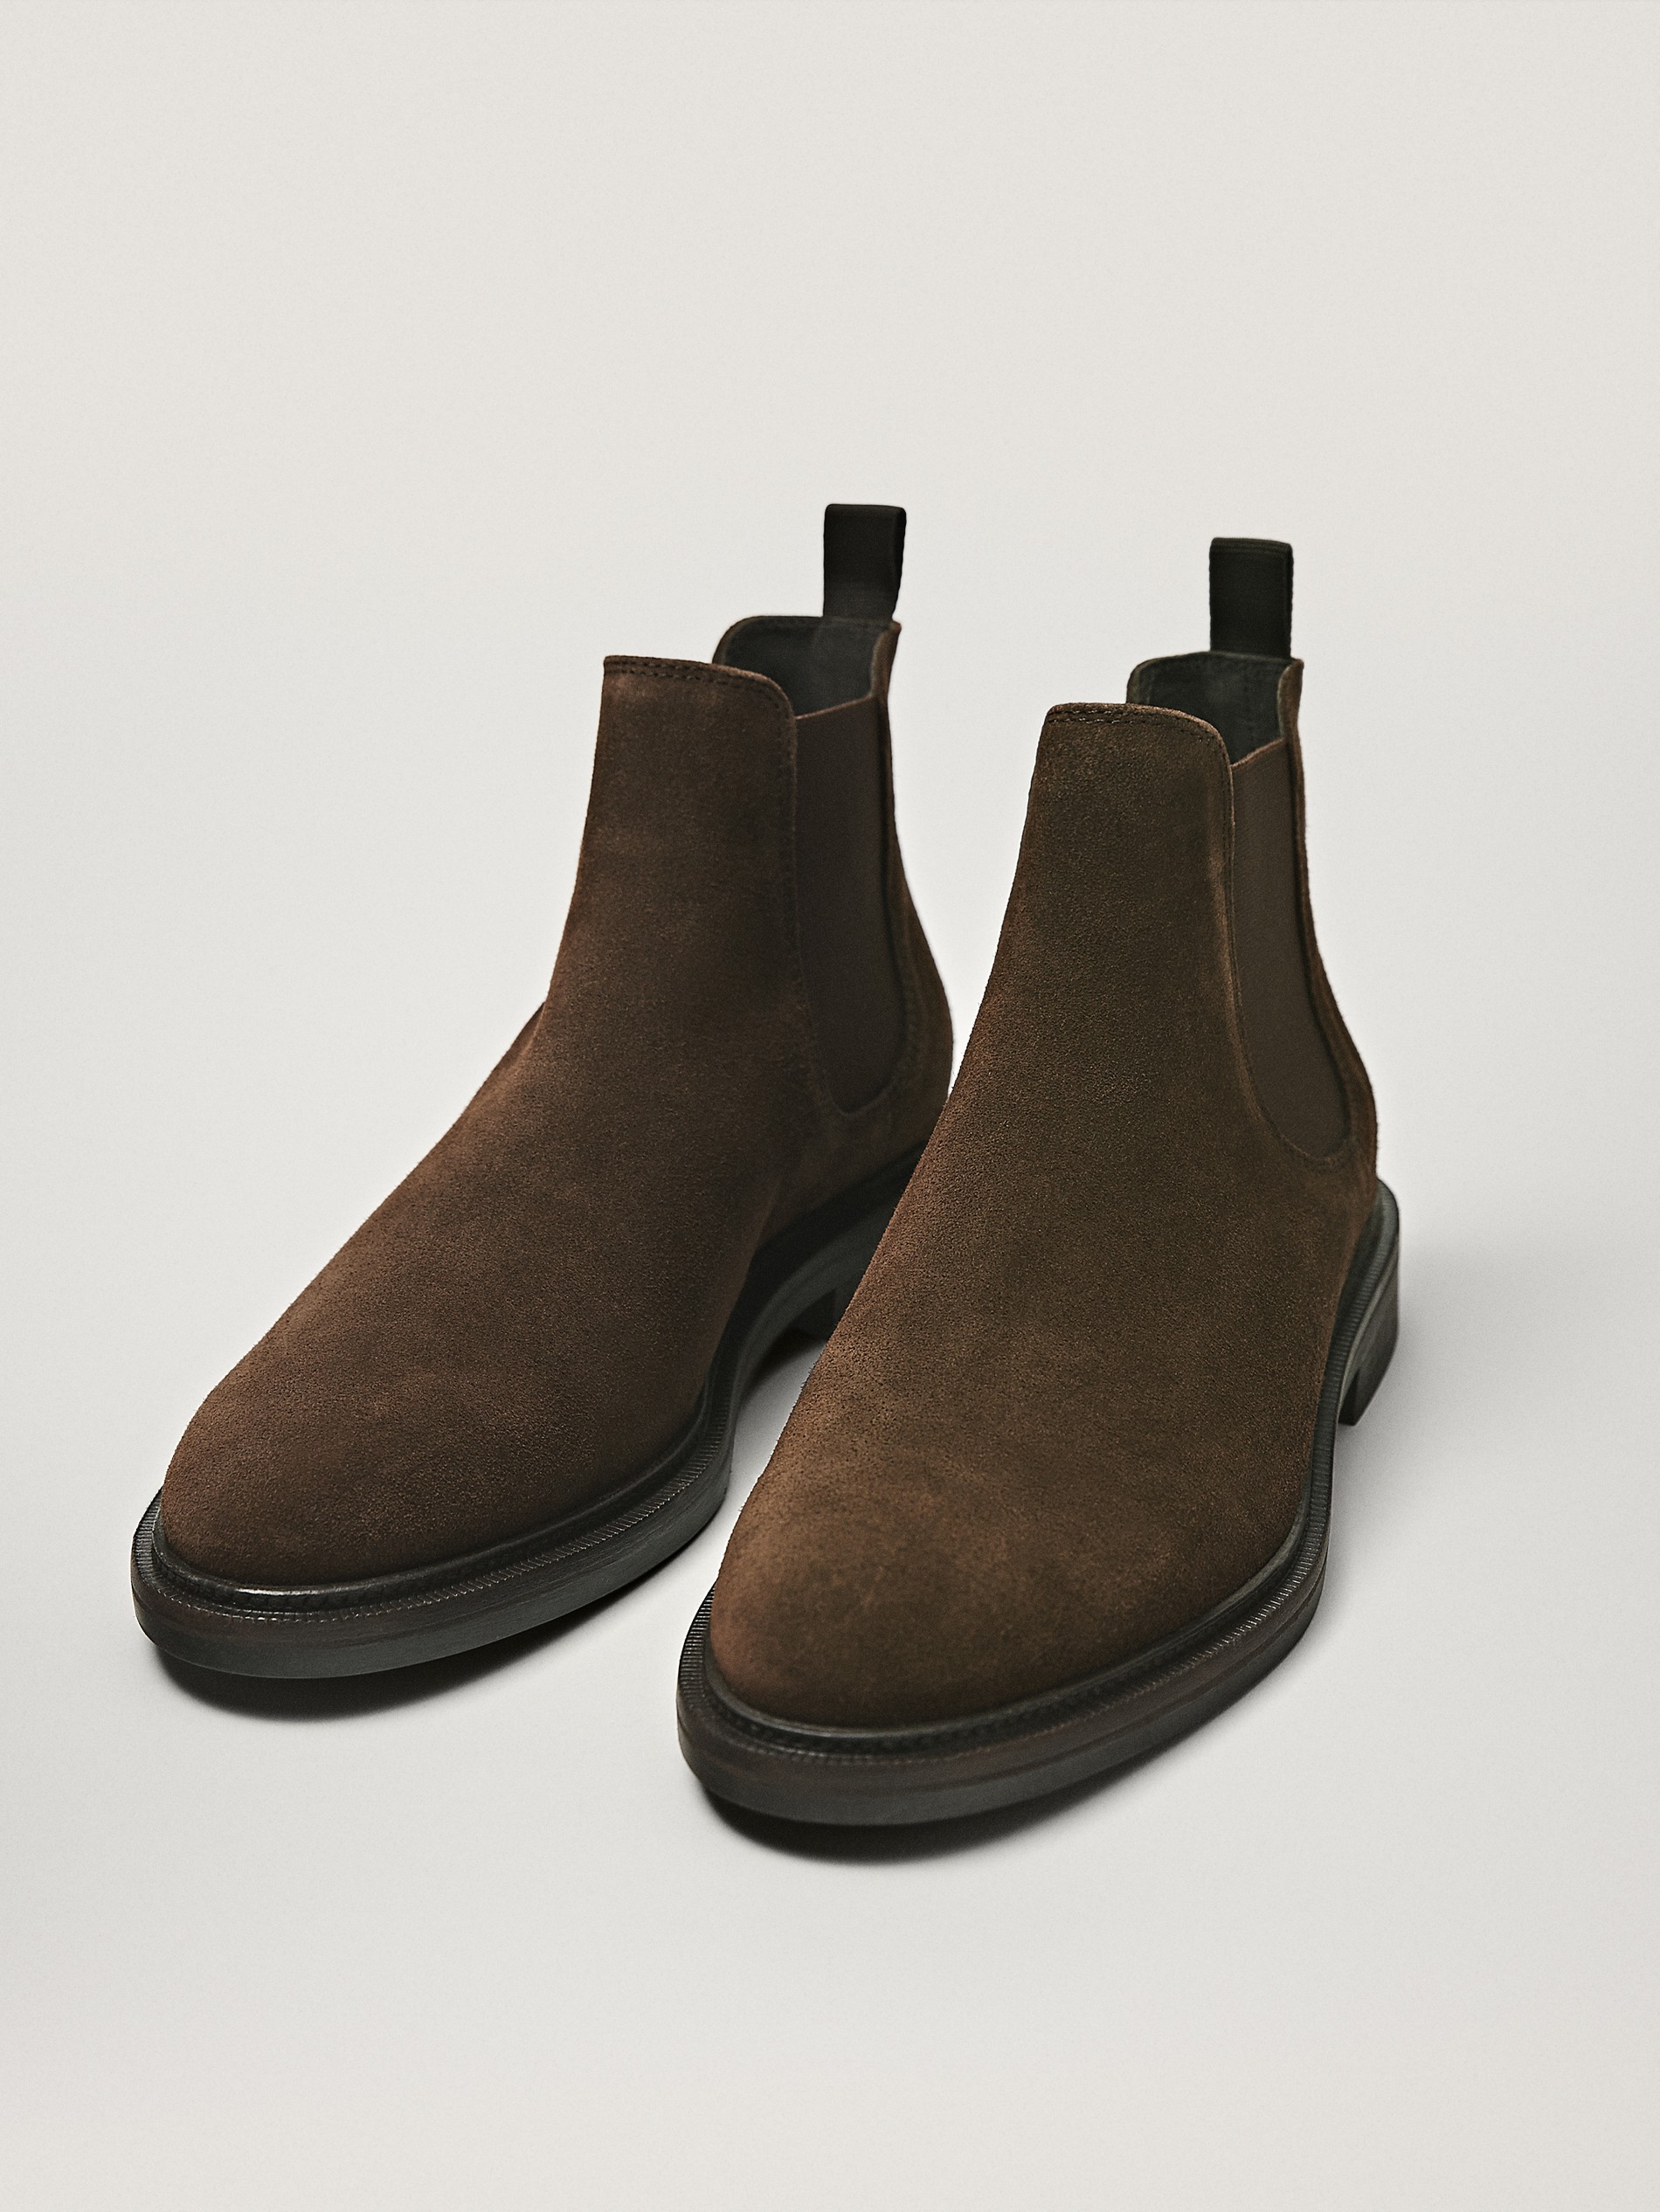 massimo dutti suede shoes